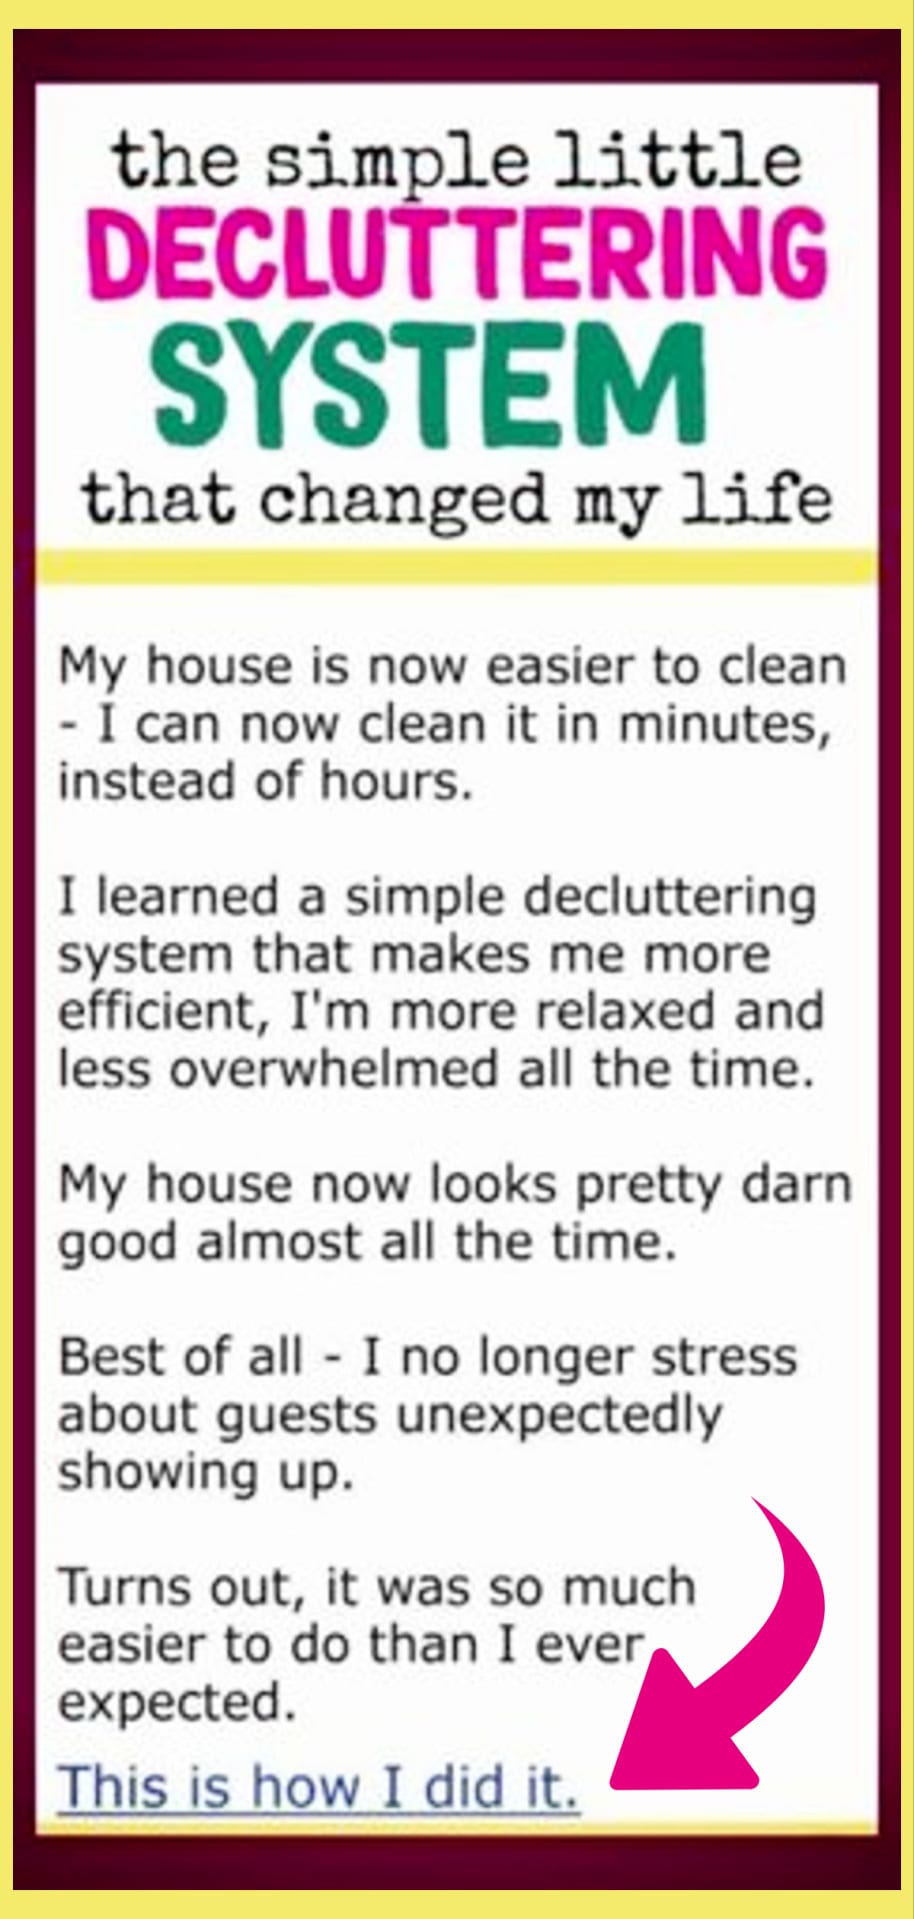 Clutter Organization and Organizing Ideas For The Home - Decluttering Ideas if you're feeling overwhelmed - where to start decluttering and organizing your messy house - decluttering step by step to declutter and organize without feeling overwhelmed